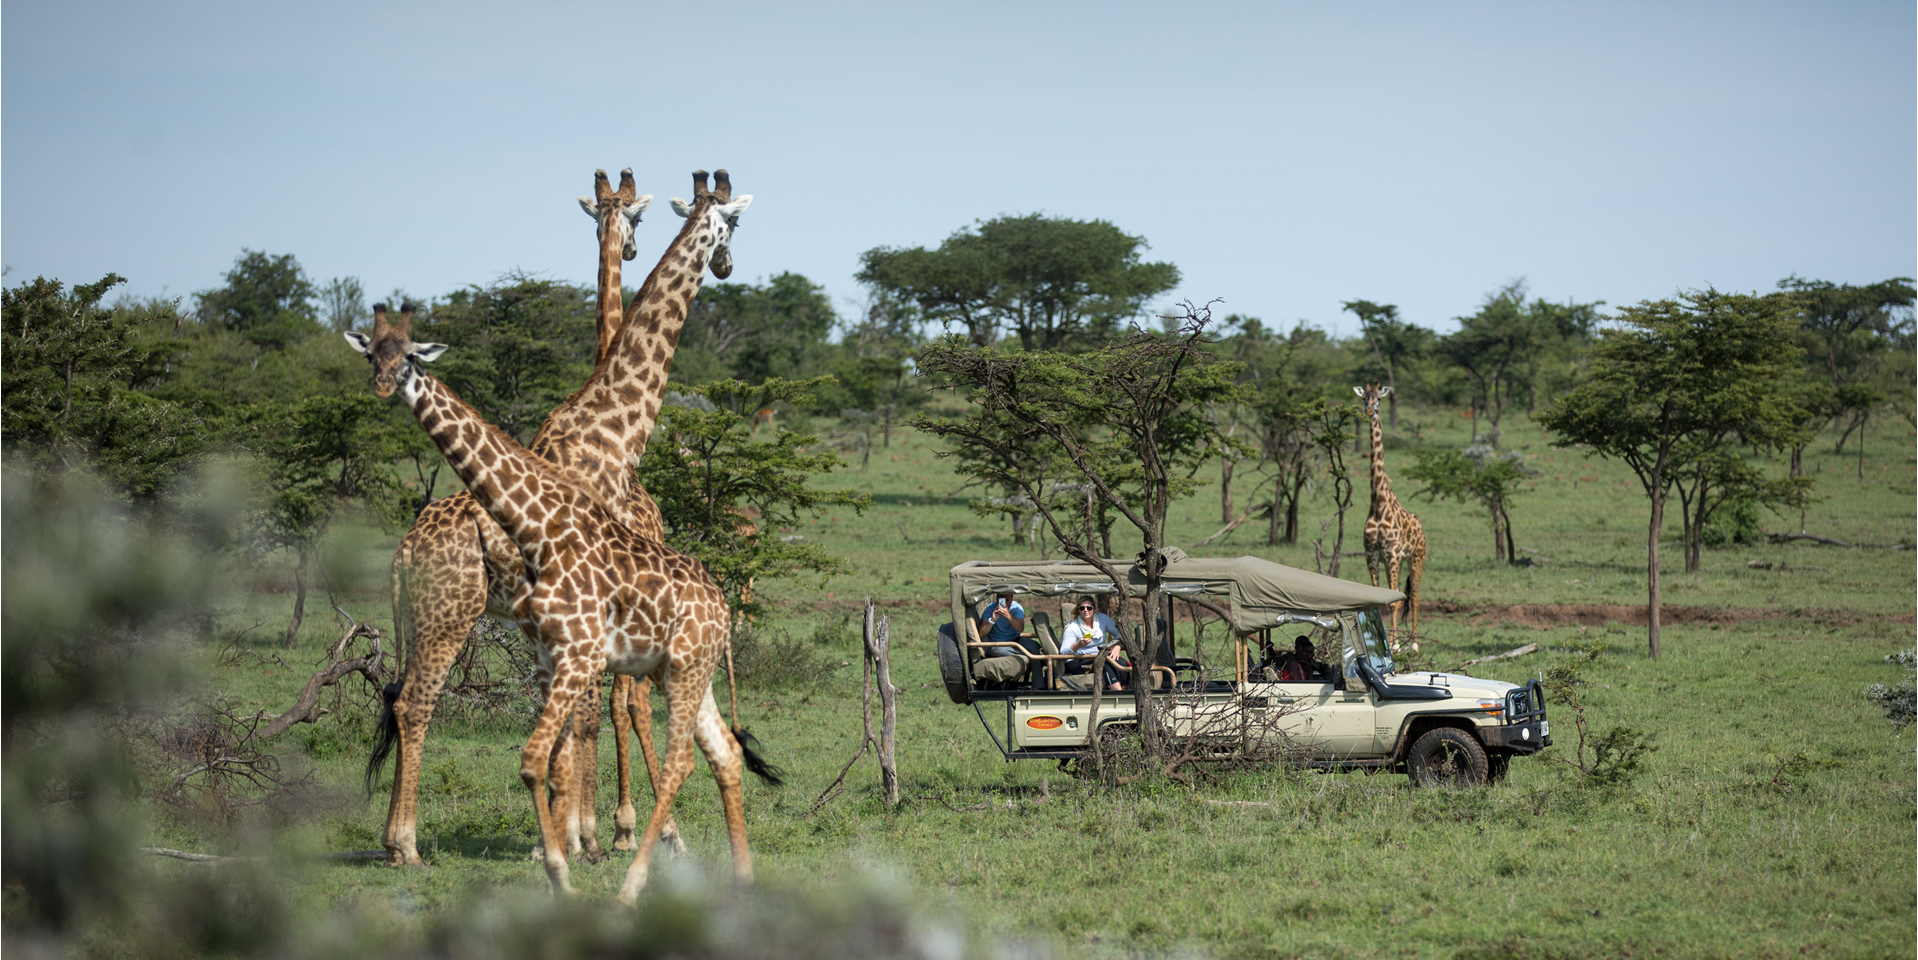 ministry of tourism and wildlife kenya